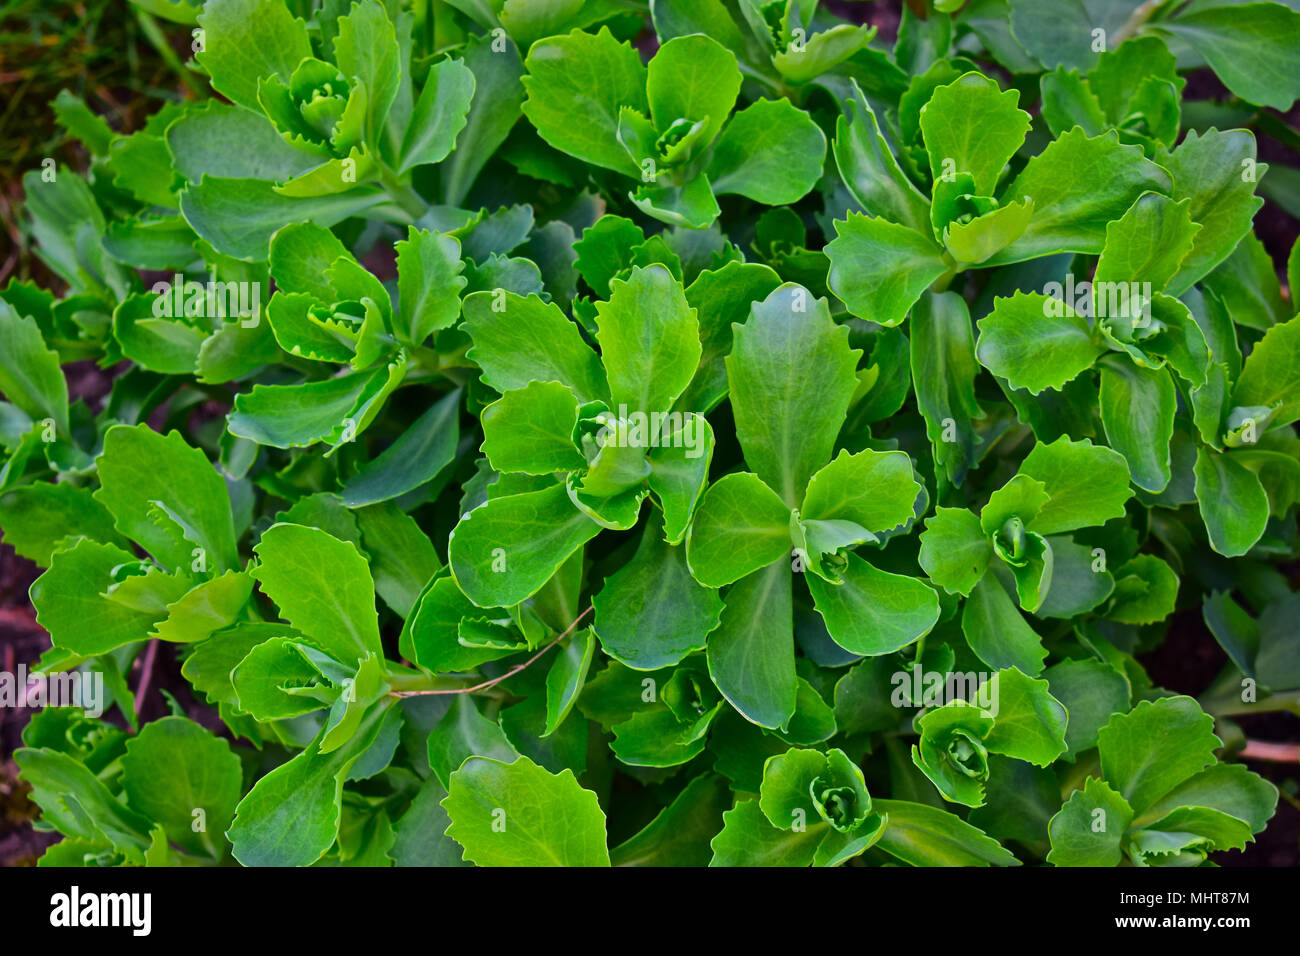 The lush green leaves of the plant emerging in Springtime in a damp heavy clay soil border. Stock Photo